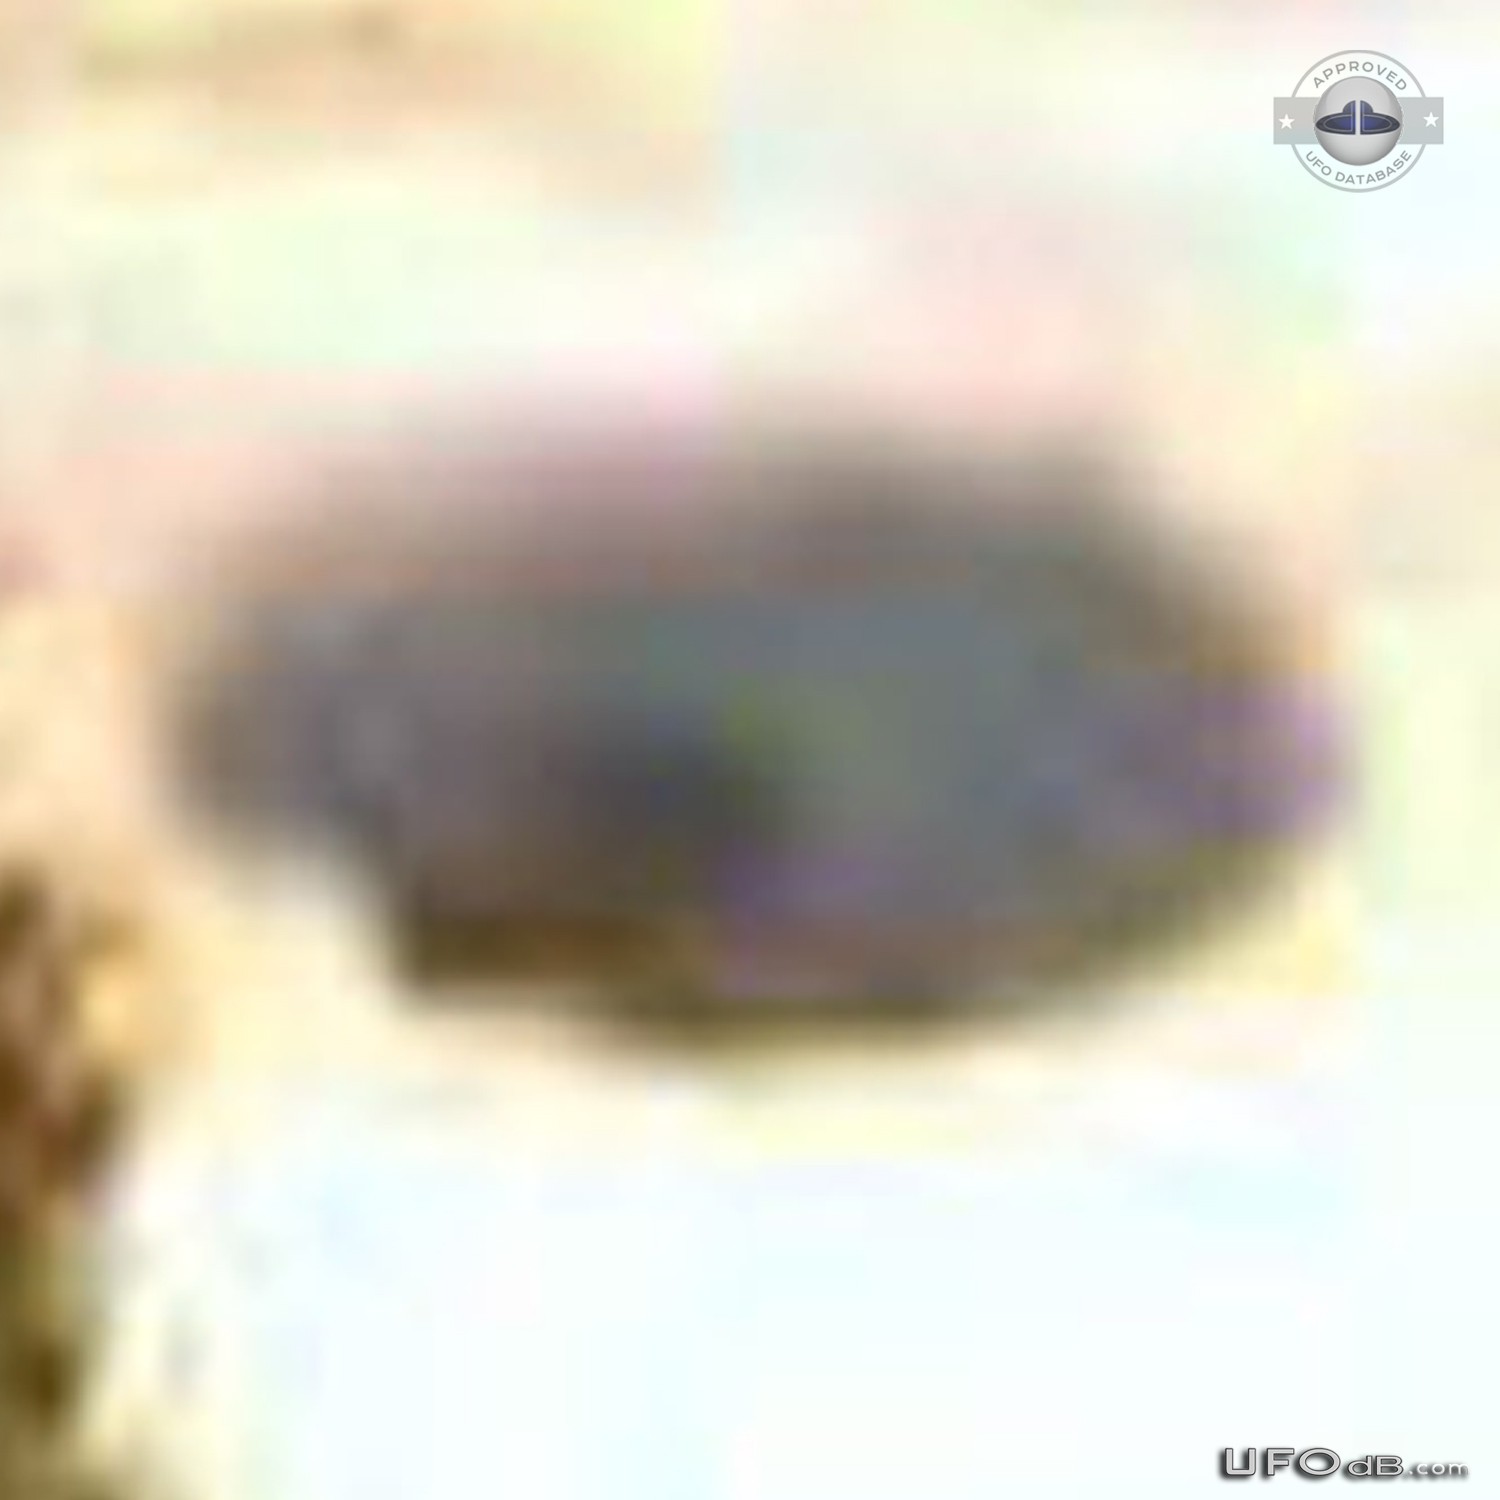 Car driver captures very fast UFO on picture | Michigan | April 8 2011 UFO Picture #264-6